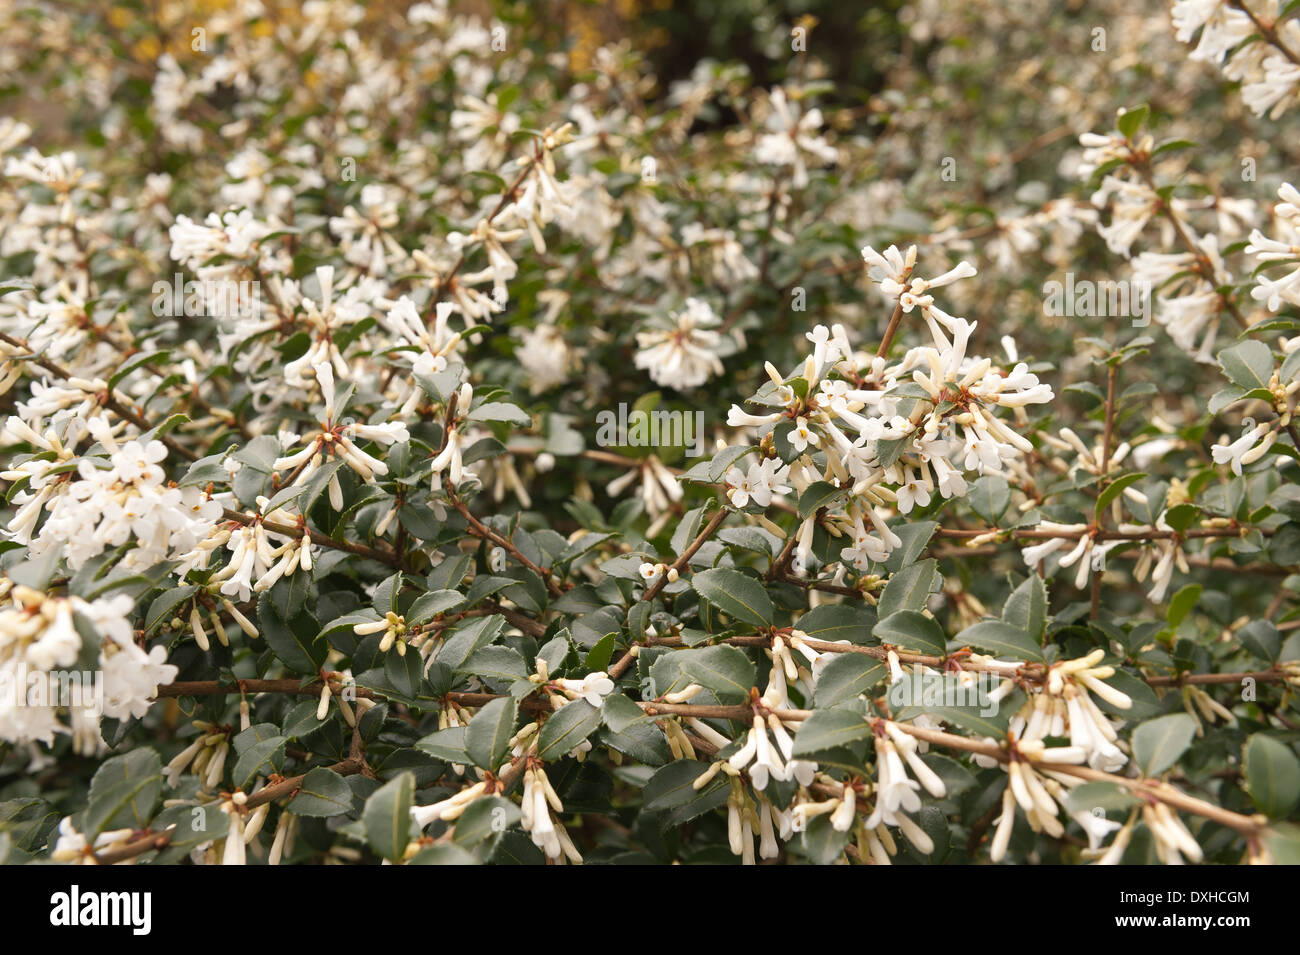 Flowering Osmanthus delavayi shrub with lots of dense leaves and flowers Stock Photo